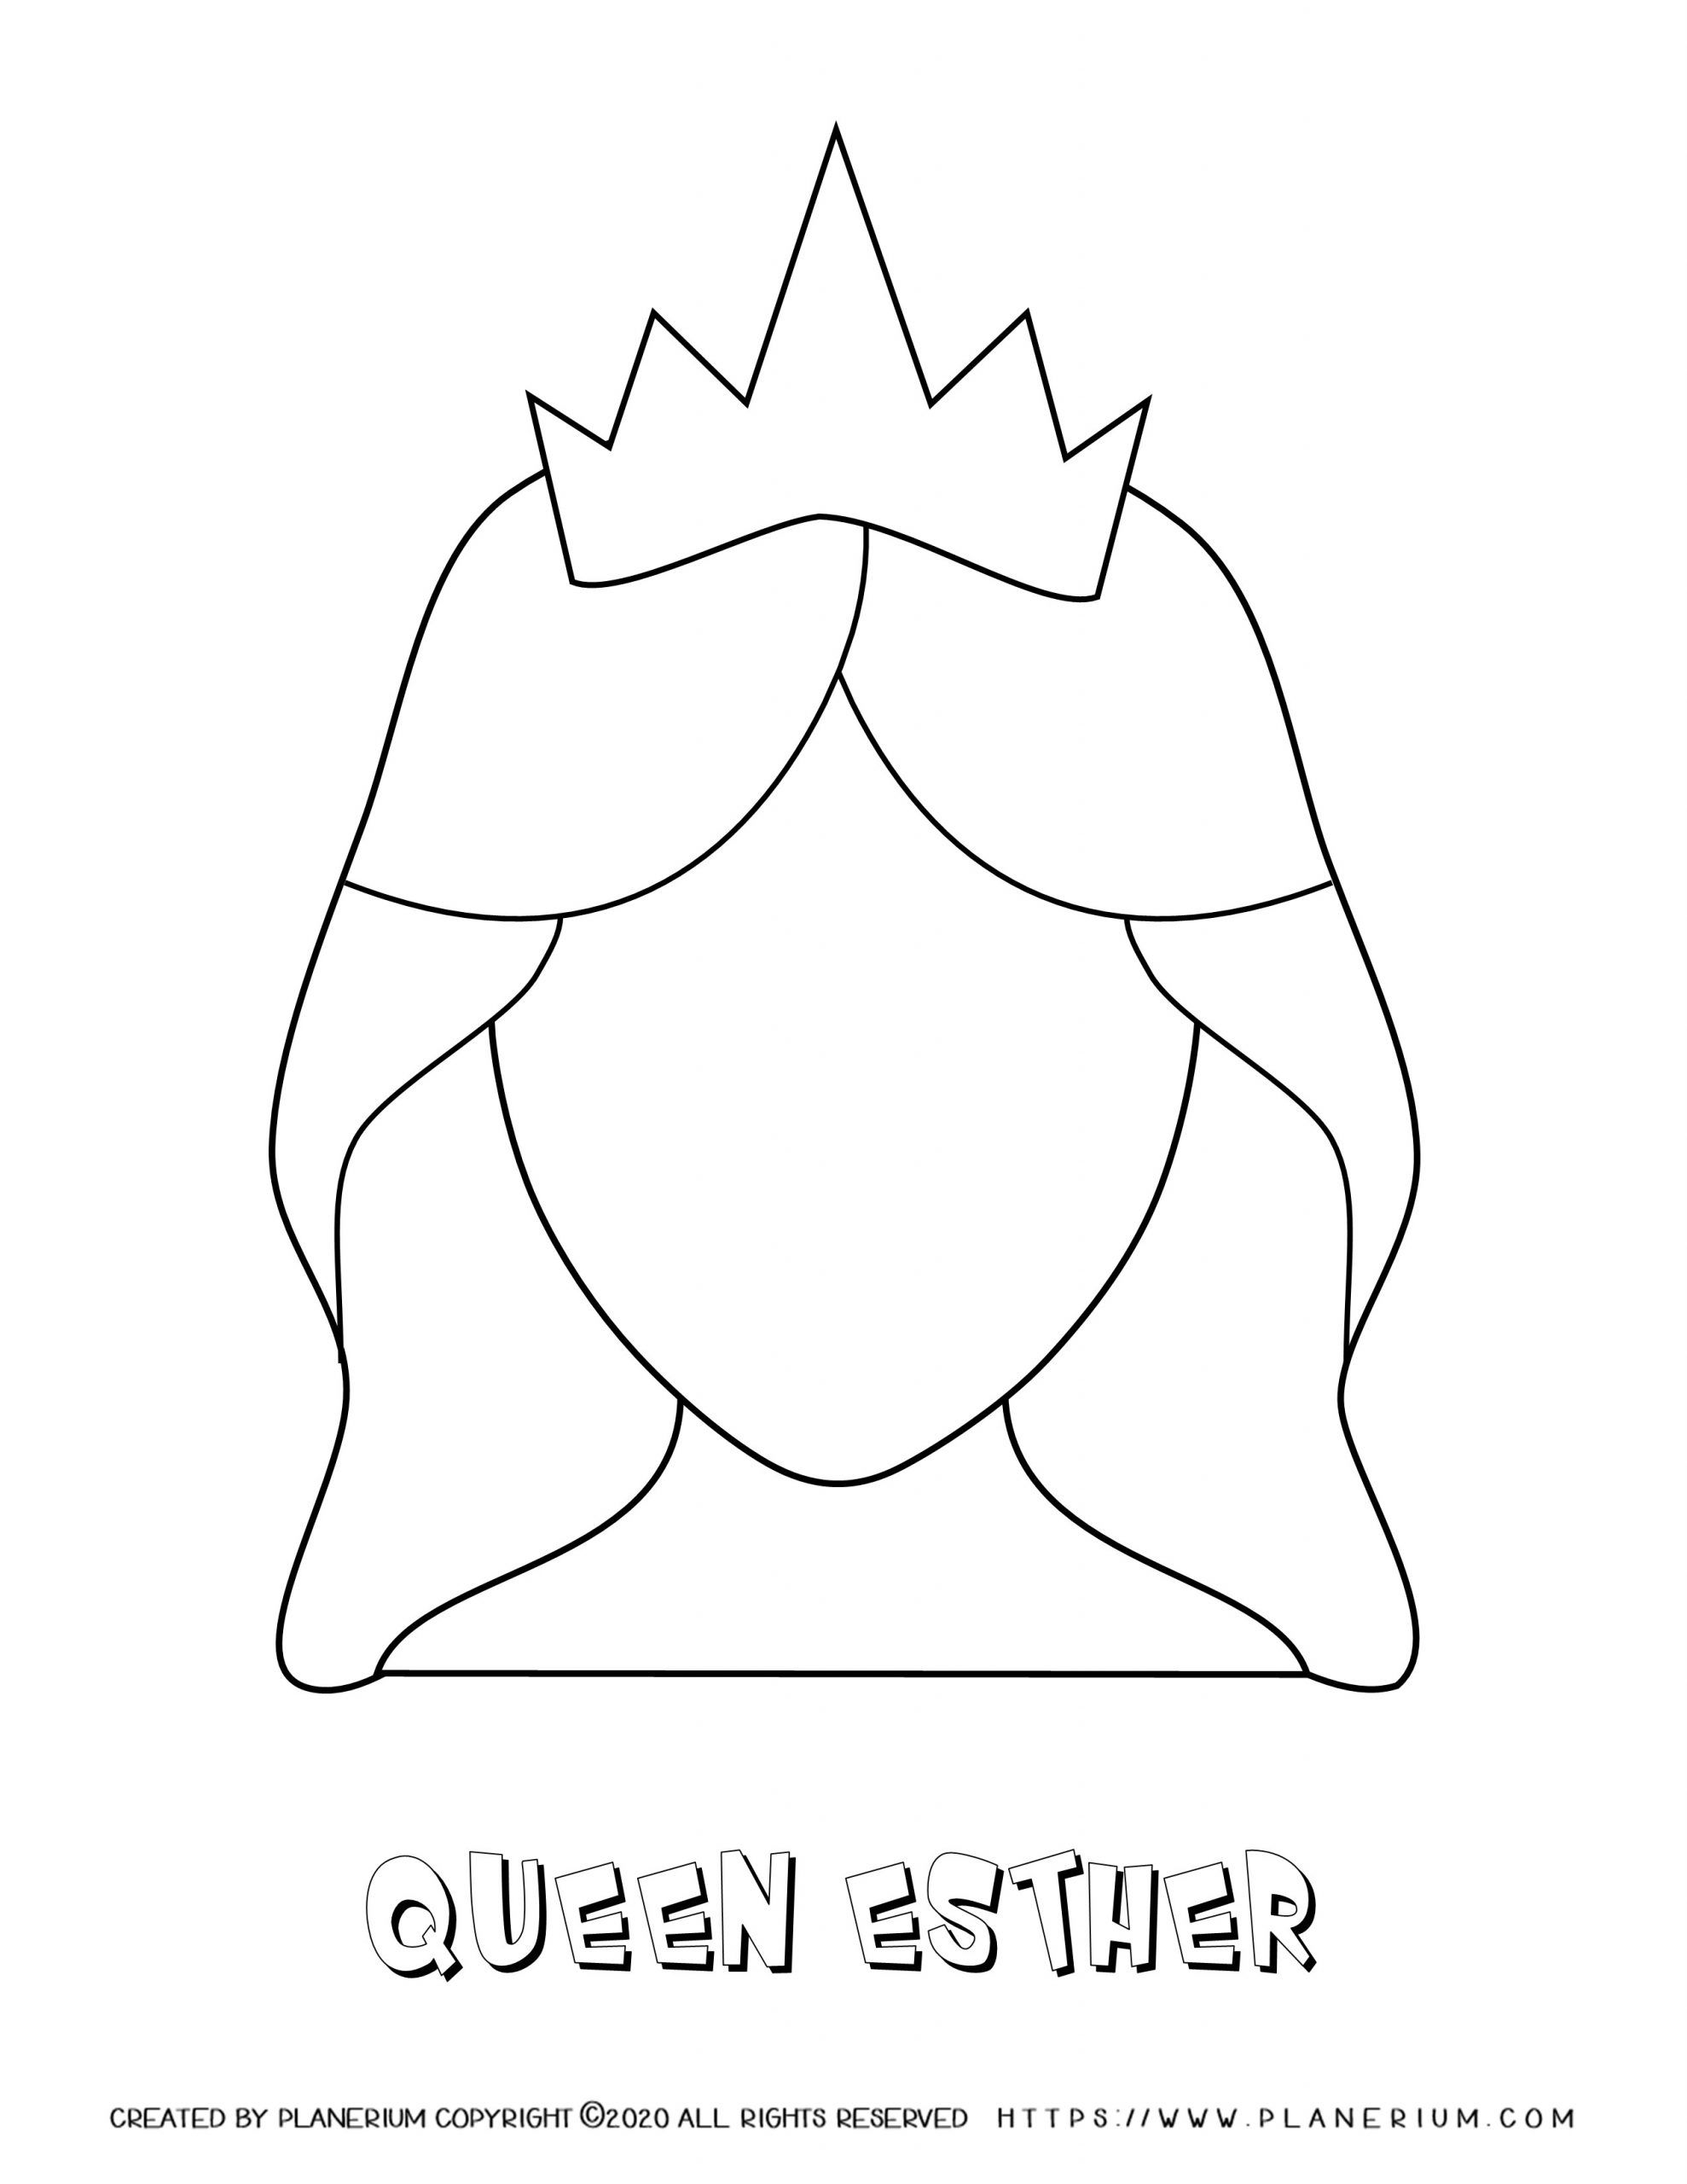 Purim - Coloring page - Queen Esther Template | Planerium